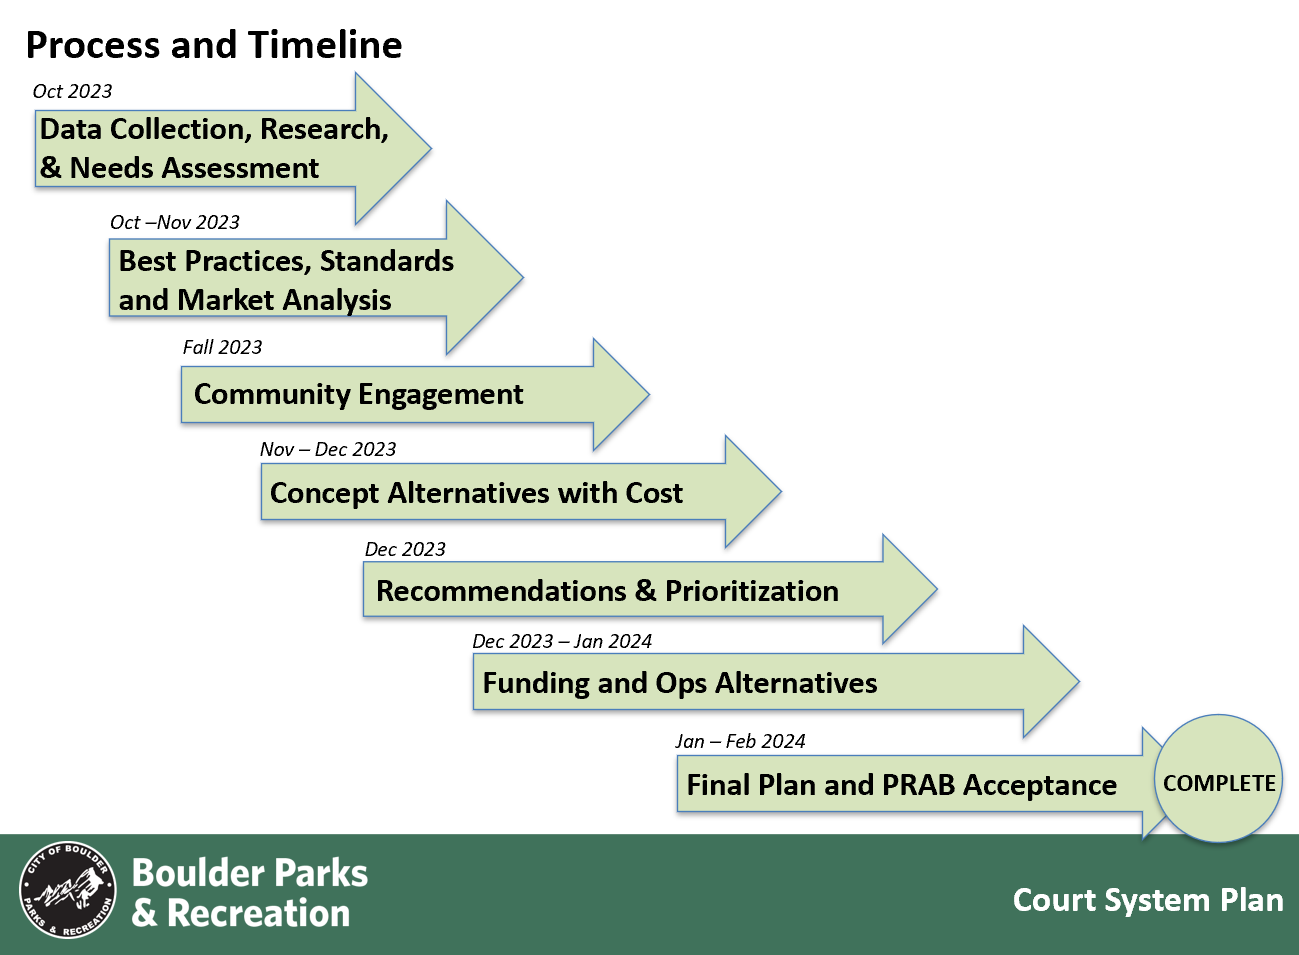 Timeline of Court System project plan 